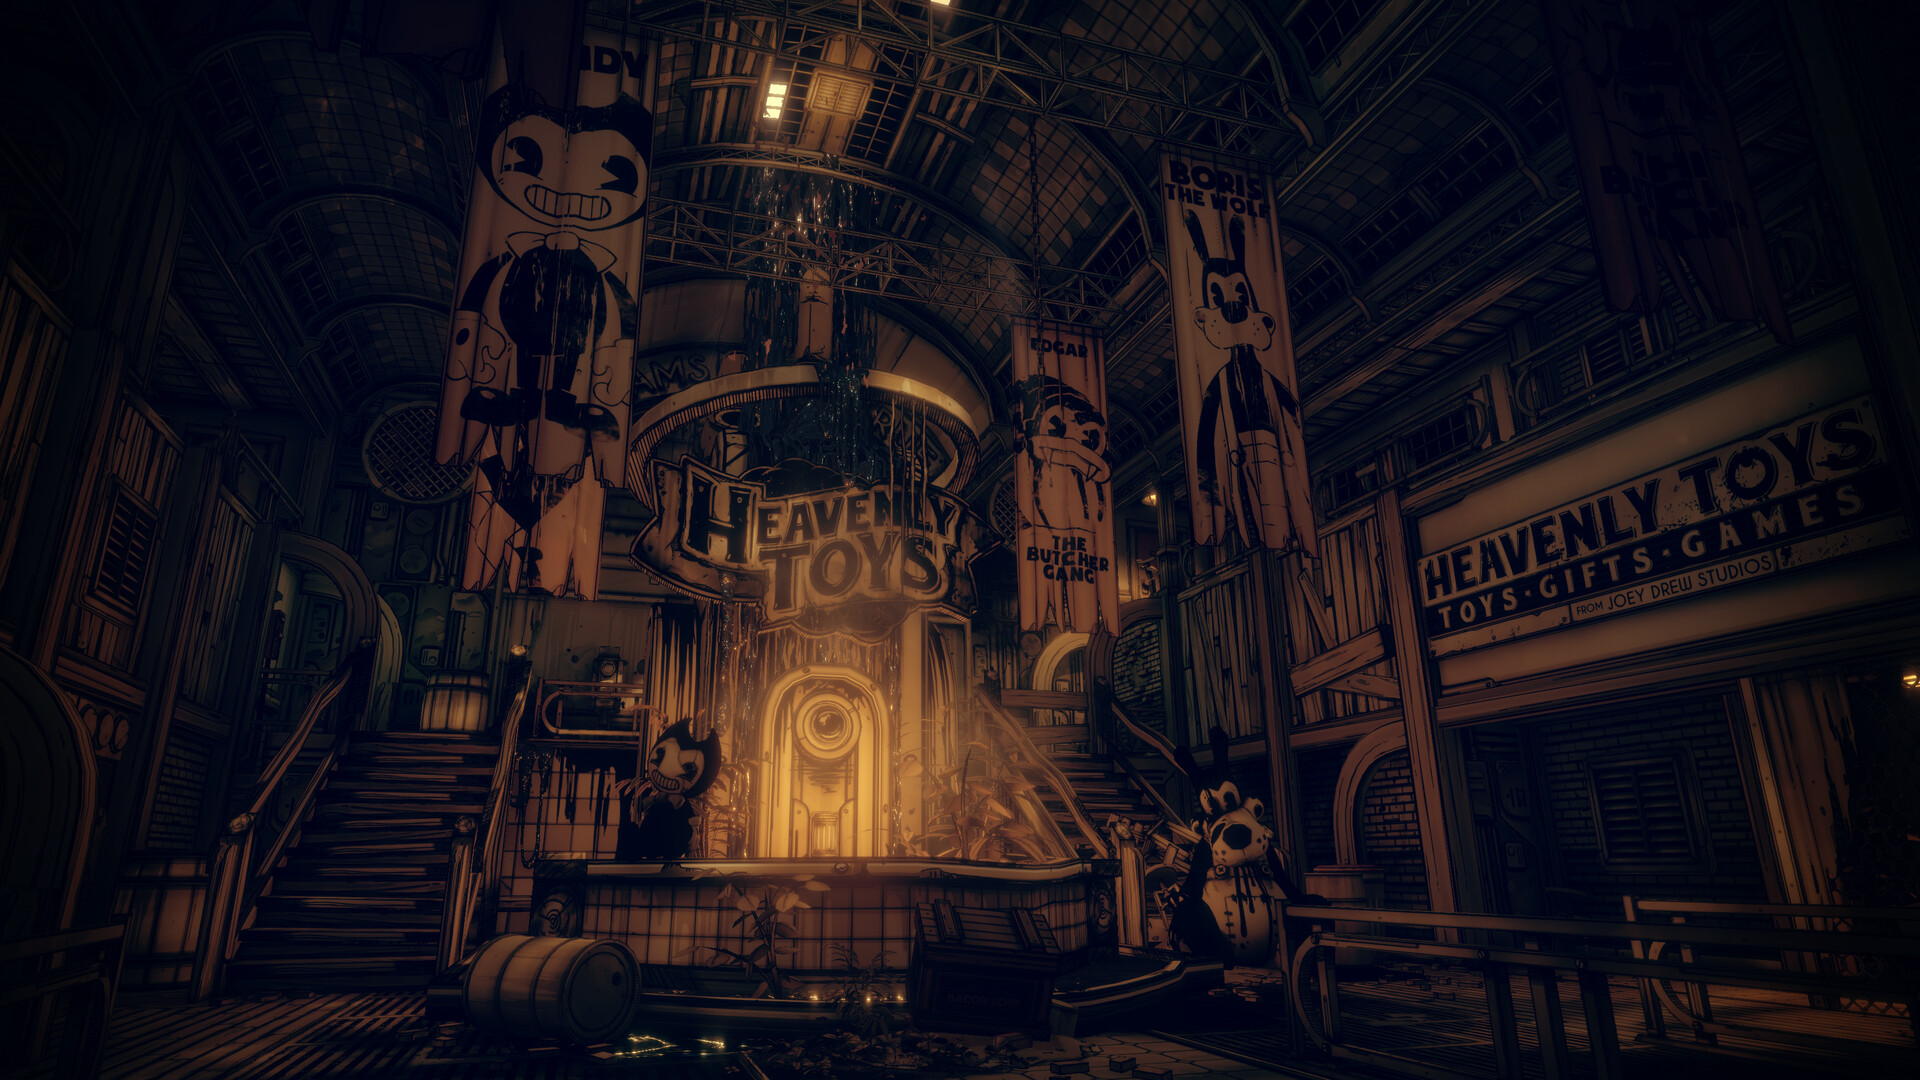 Bendy and the Dark Revival: Chapter 5, Bendy Wiki